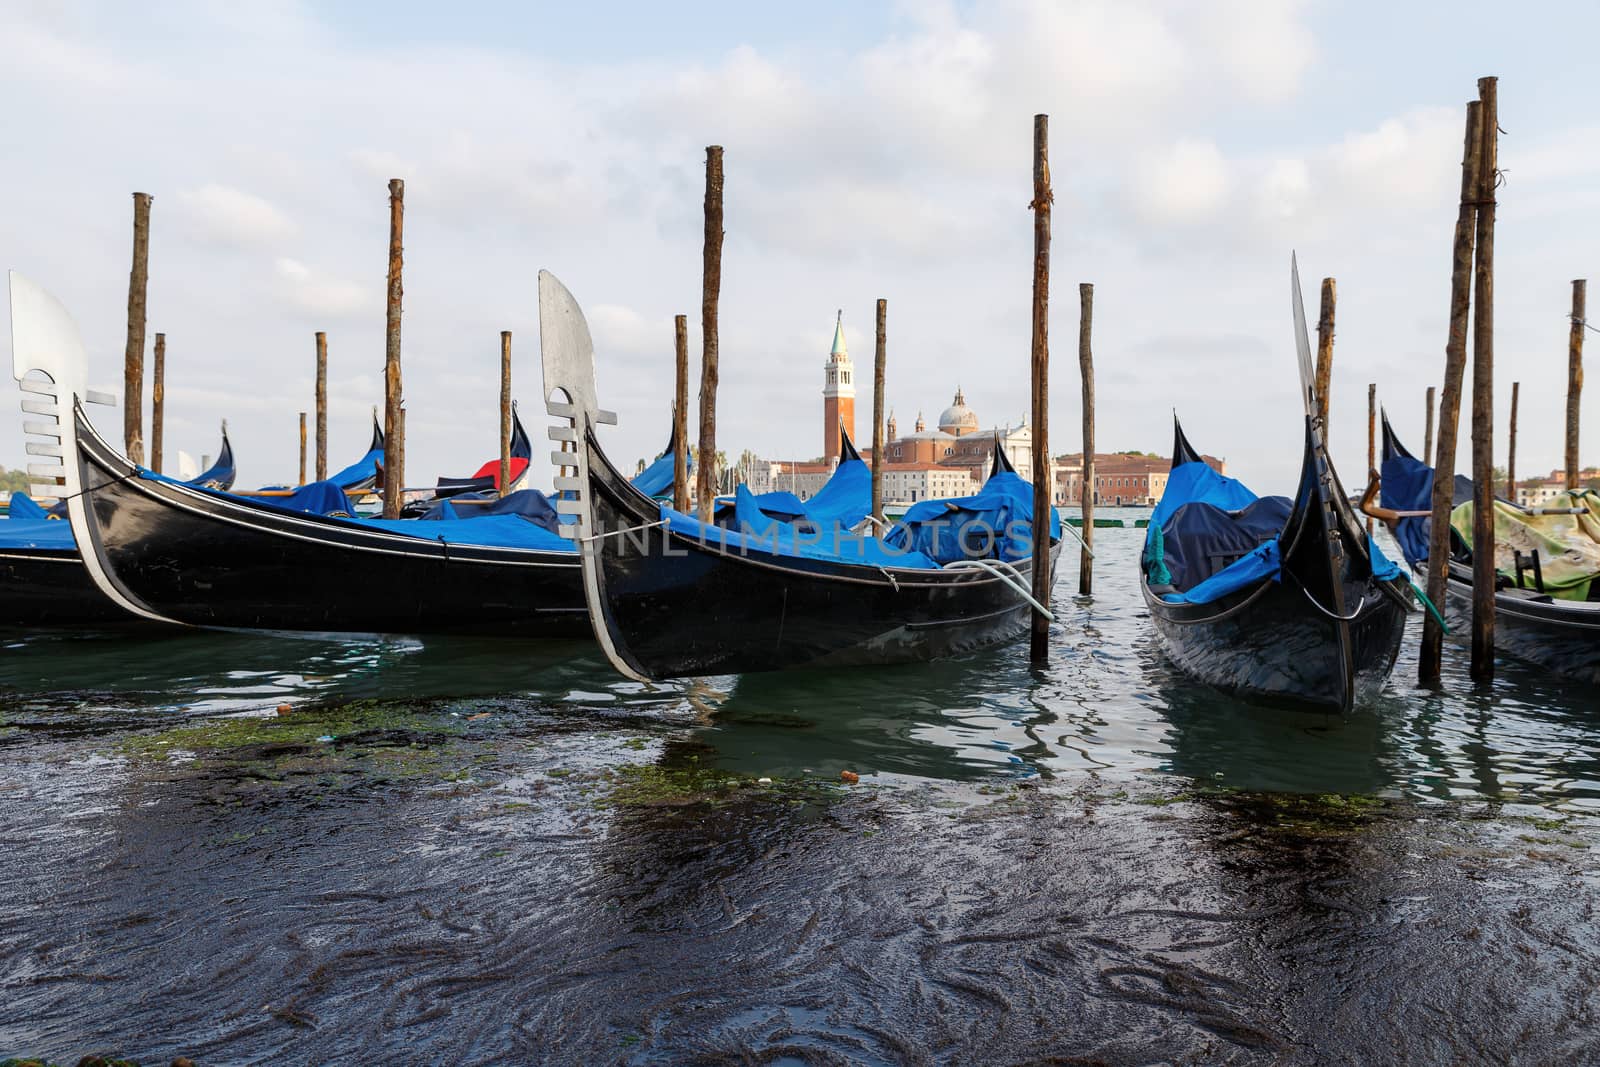 Venice, Italy - CIRCA 2020: View of empty gondolas on a water canal in Venice Italy. Concept of the effects of lock down due to CoronaVirus COVID-19. Picturesque landscape. by dugulan